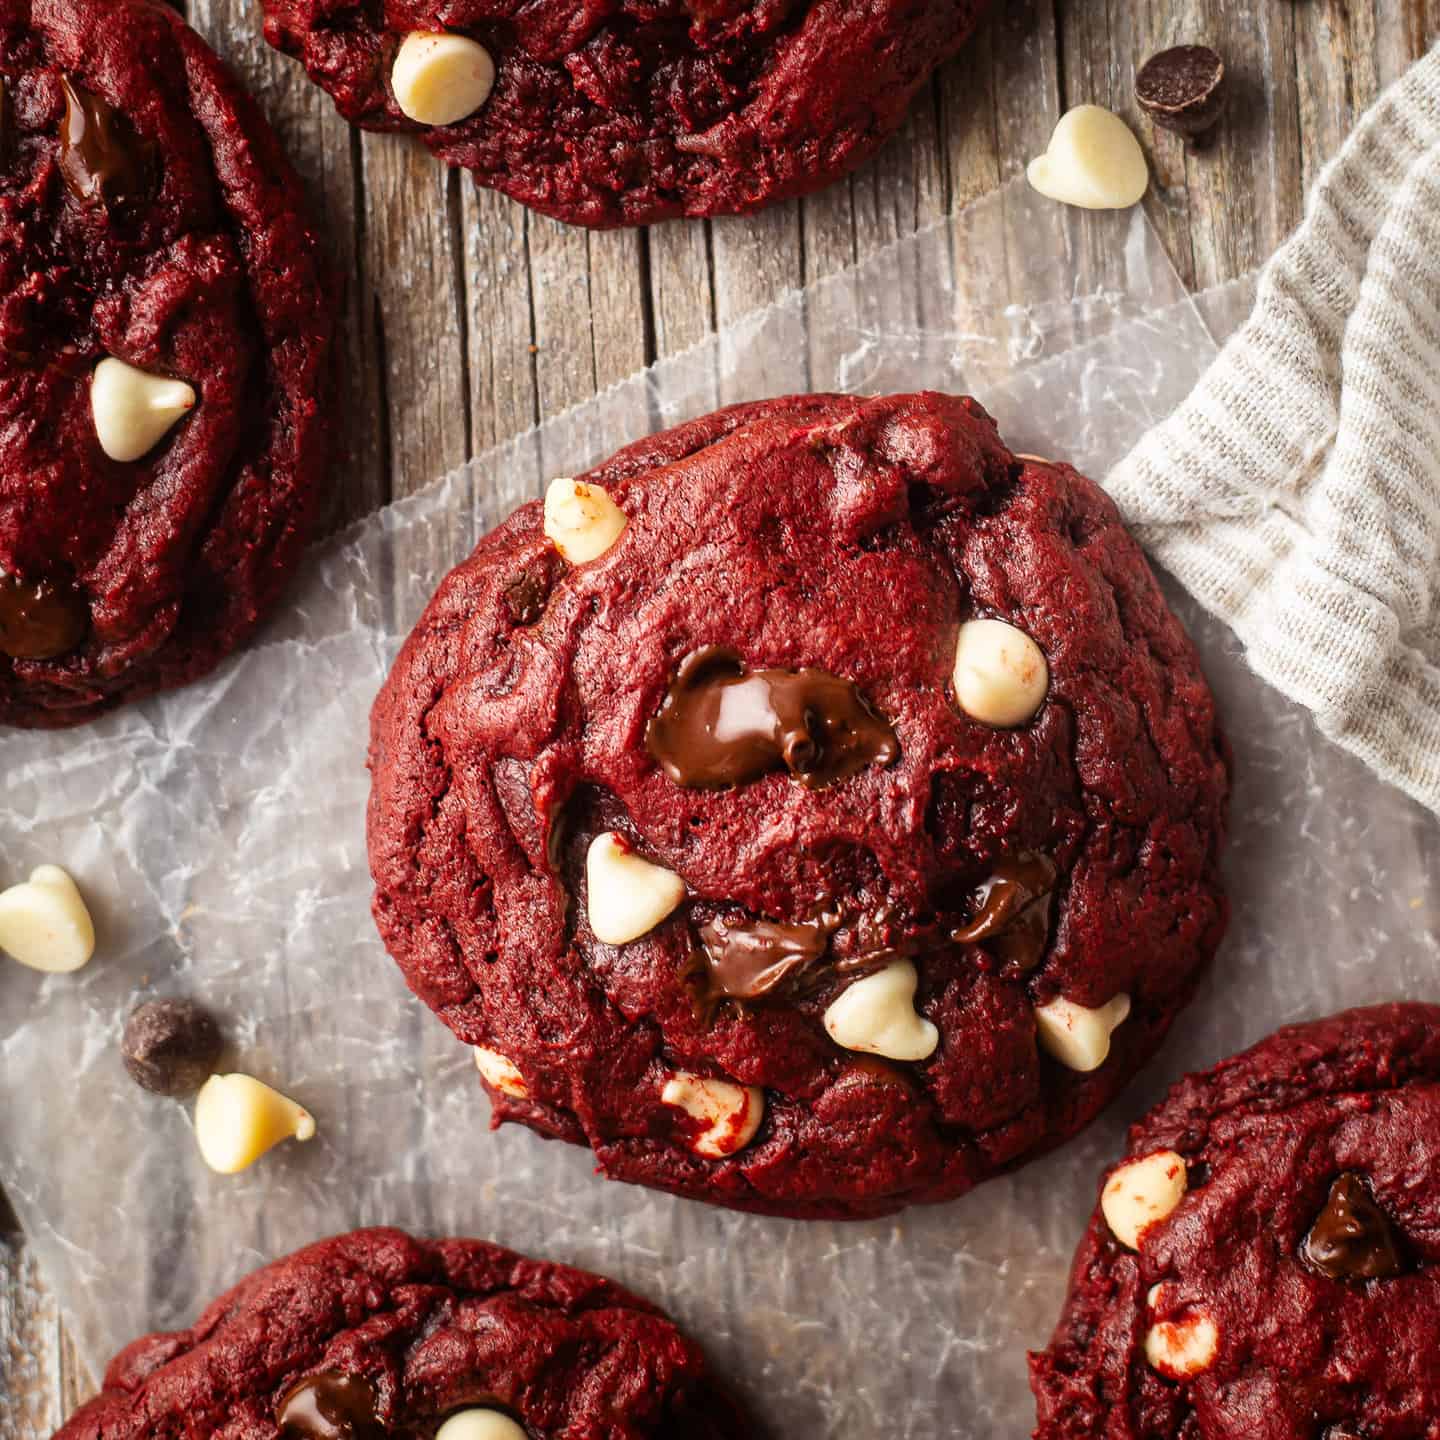 Red velvet chocolate chip cookies with white and dark chocolate chips.